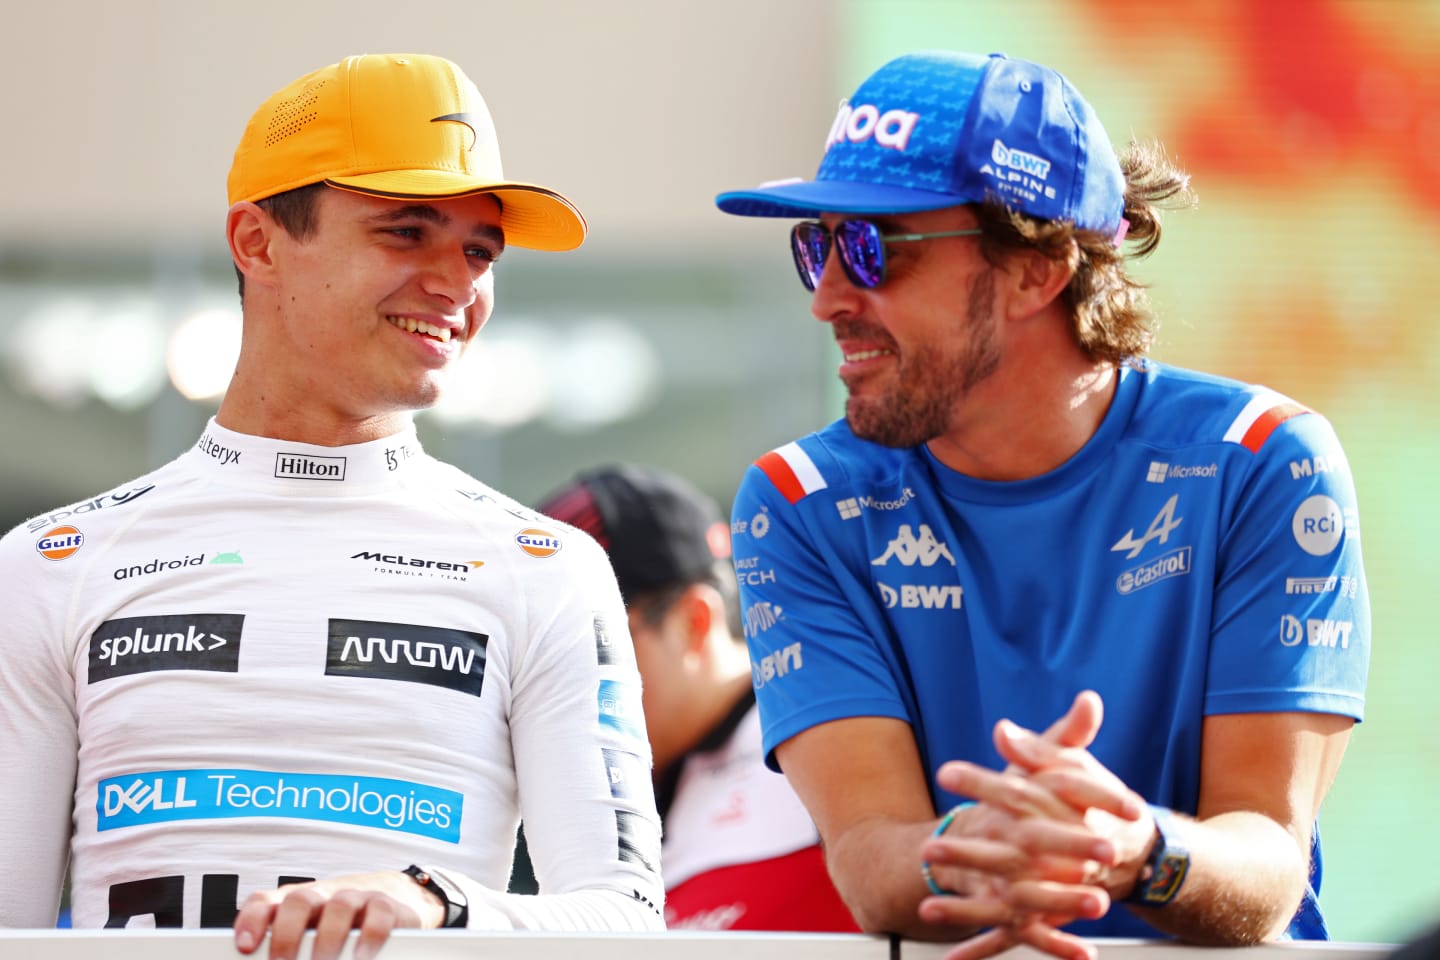 ABU DHABI, UNITED ARAB EMIRATES - NOVEMBER 20: Lando Norris of Great Britain and McLaren talks with Fernando Alonso of Spain and Alpine F1 on the drivers parade prior to the F1 Grand Prix of Abu Dhabi at Yas Marina Circuit on November 20, 2022 in Abu Dhabi, United Arab Emirates. (Photo by Bryn Lennon - Formula 1/Formula 1 via Getty Images)